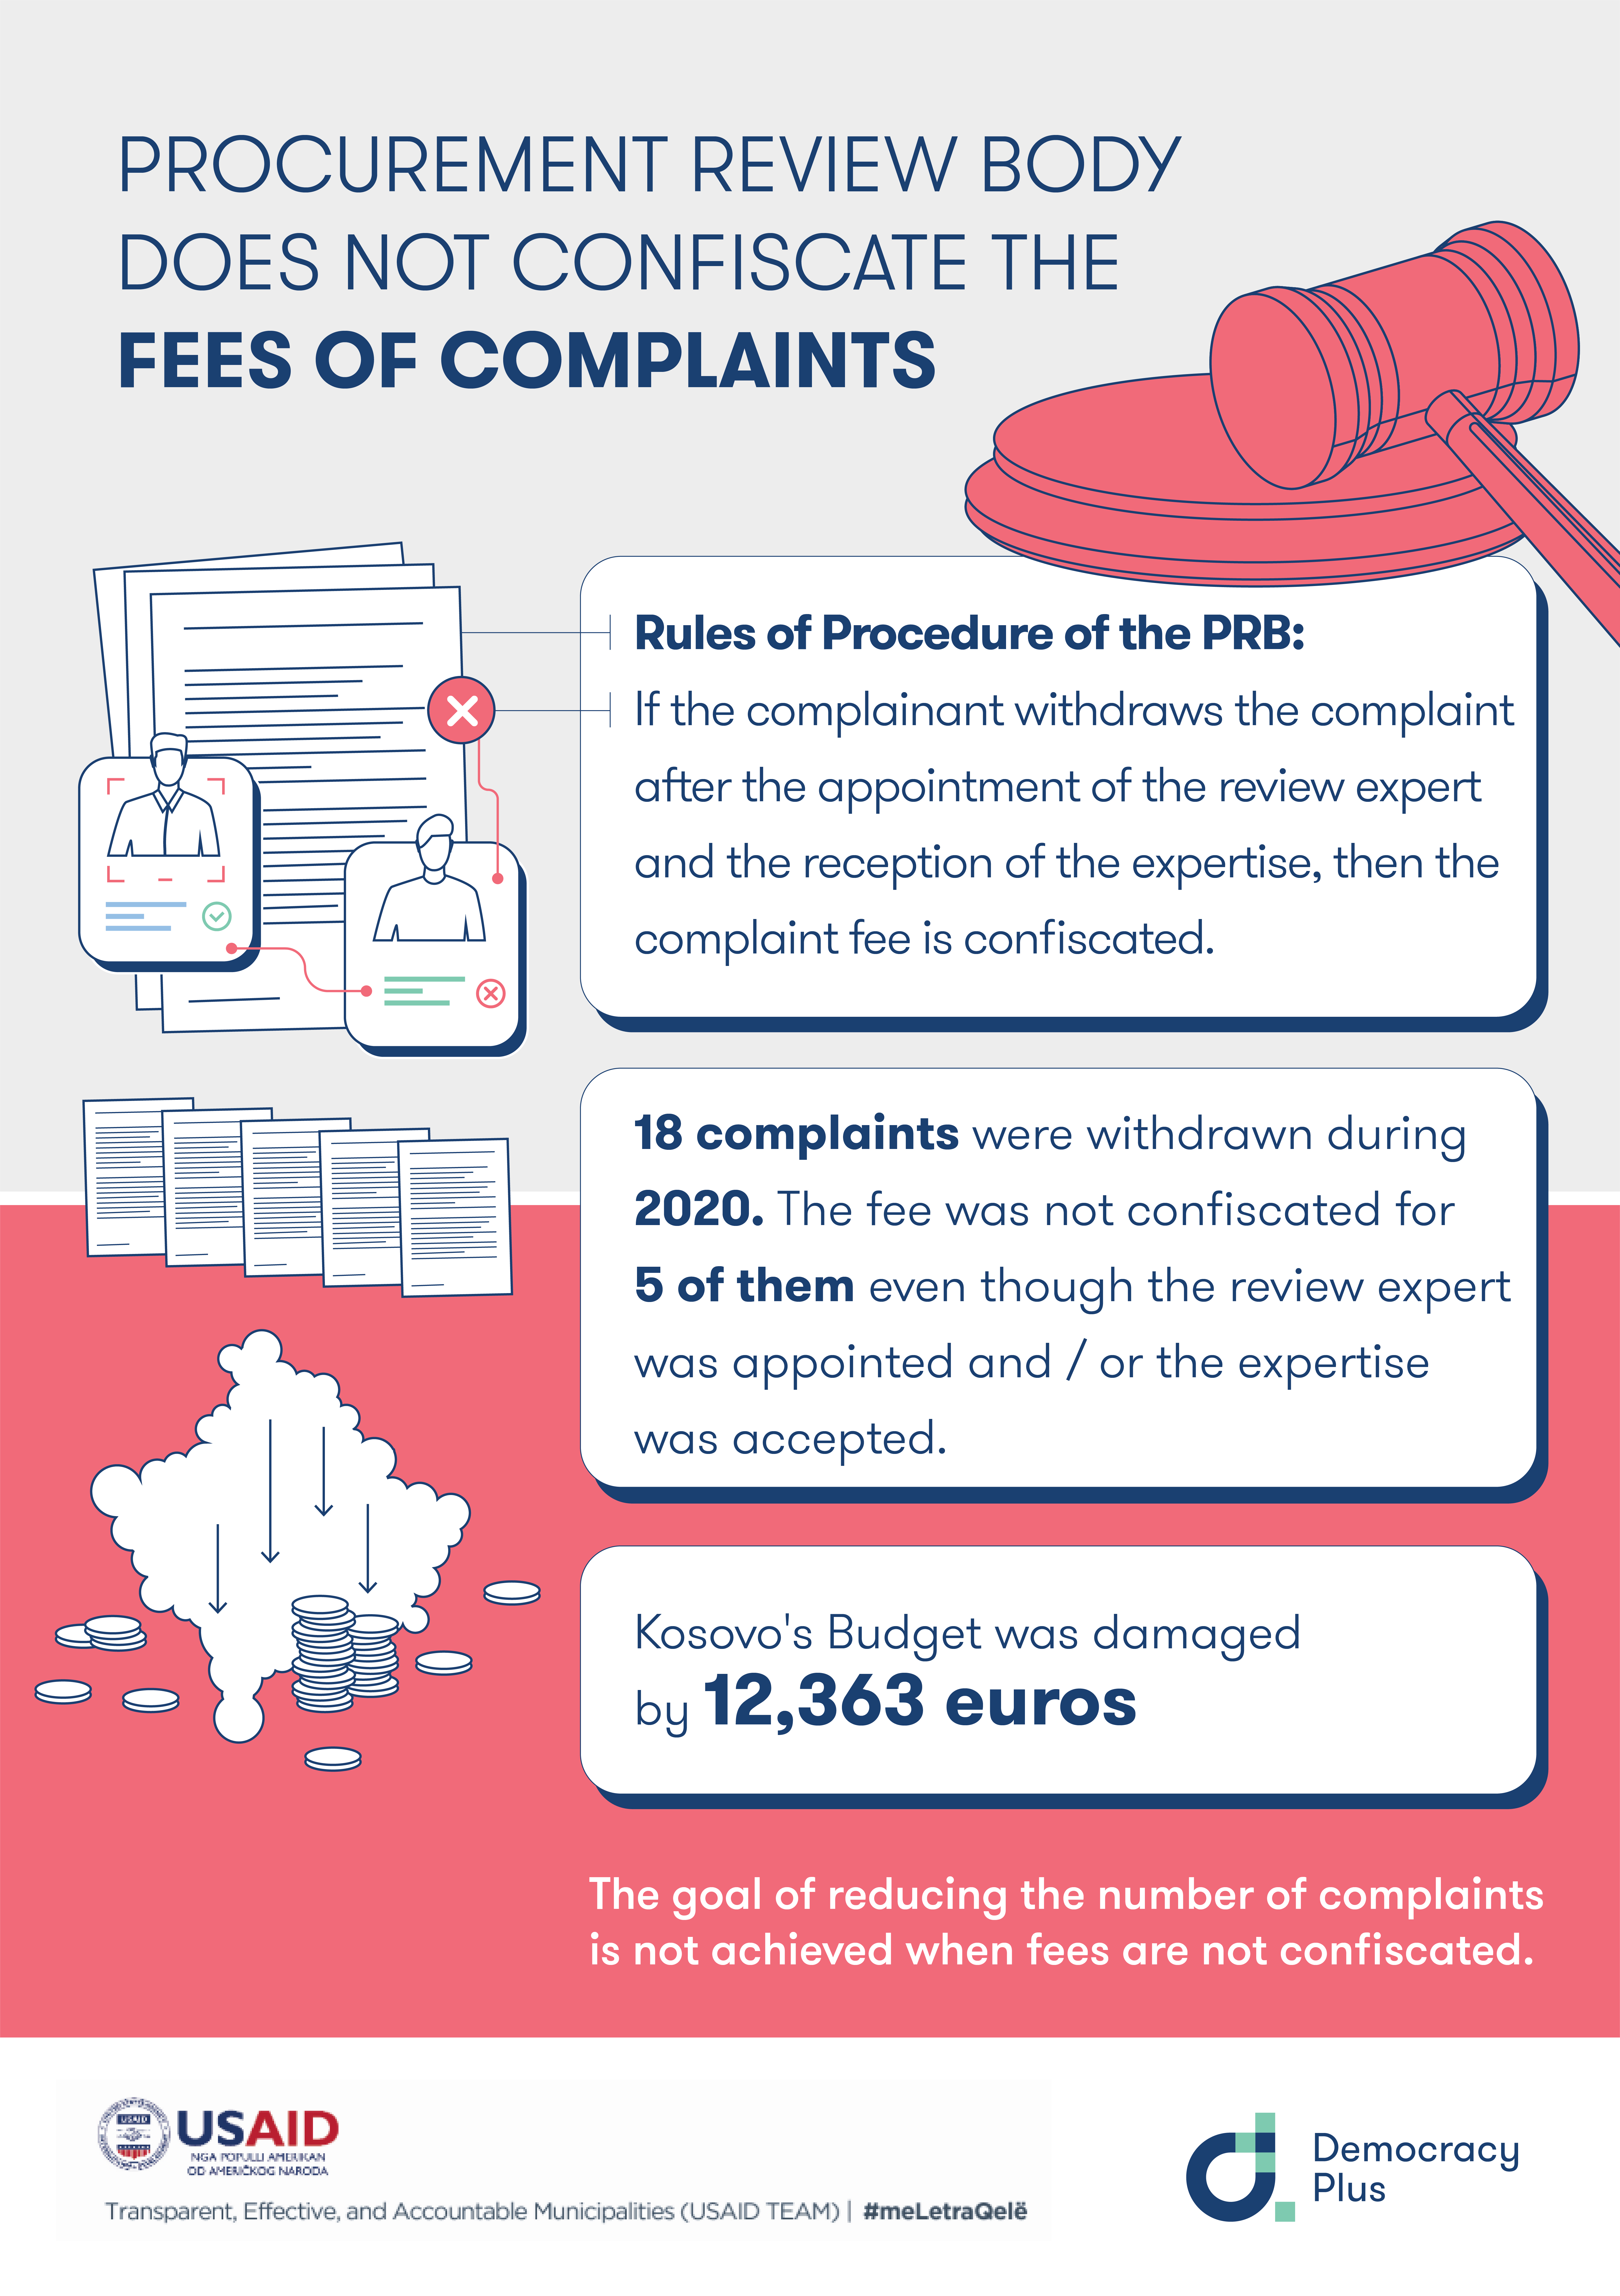 Procurement Review Body does not confiscate the fees of complaints